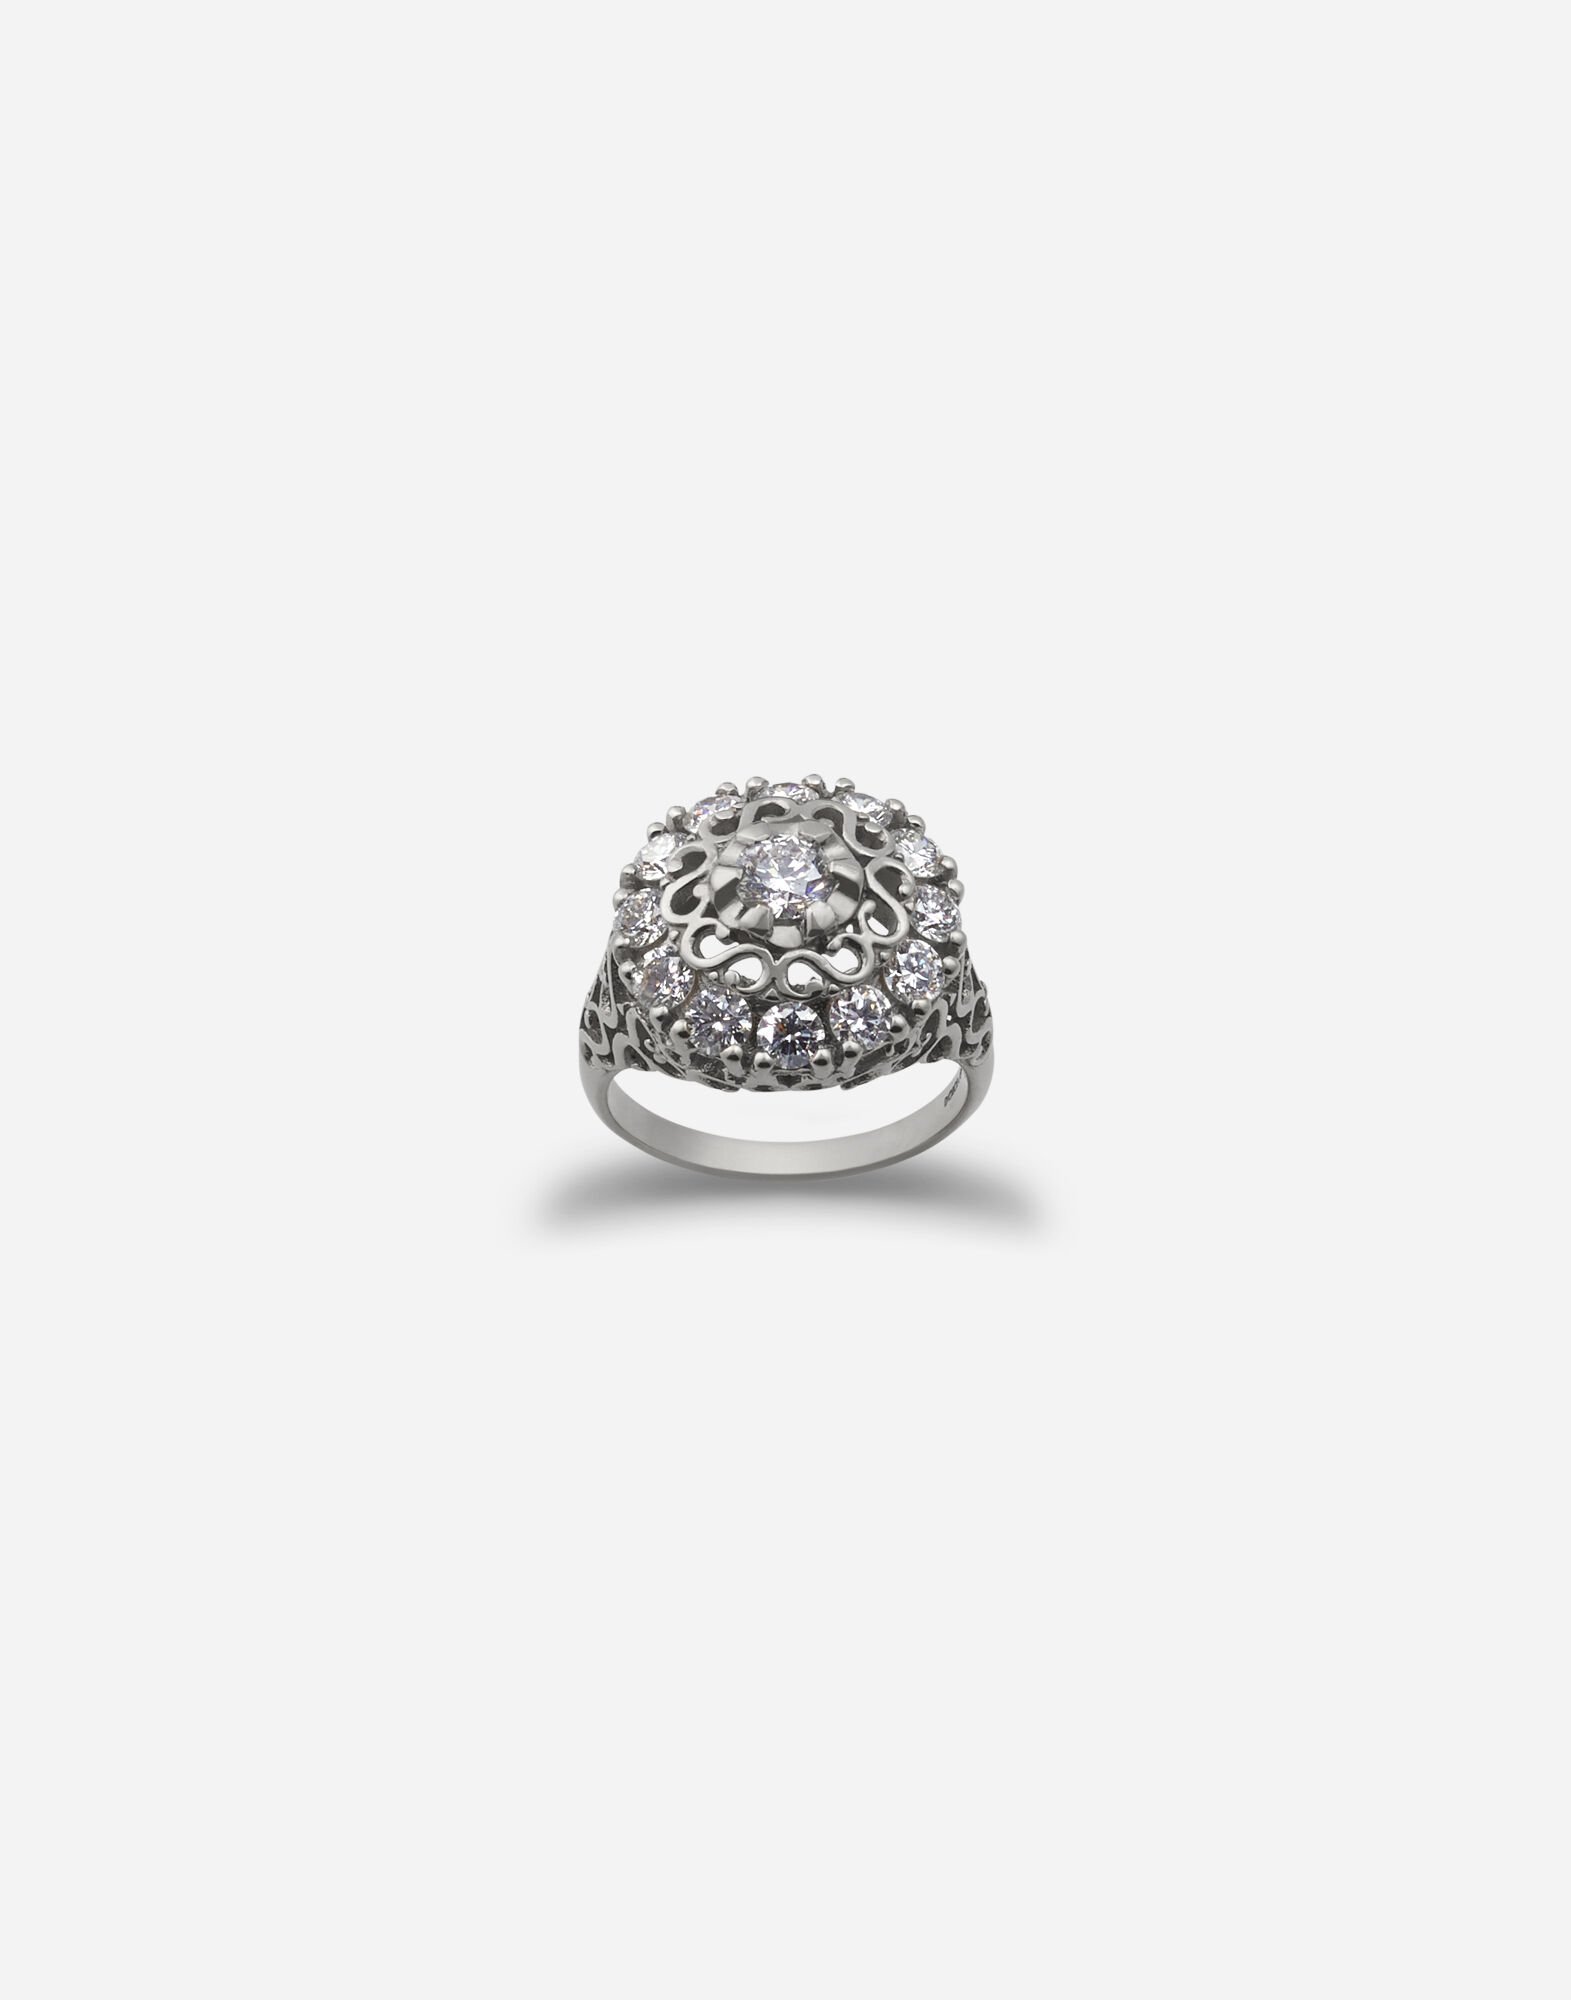 Dolce & Gabbana Sicily ring in white gold with diamonds White Gold WBLD2GWDWWH